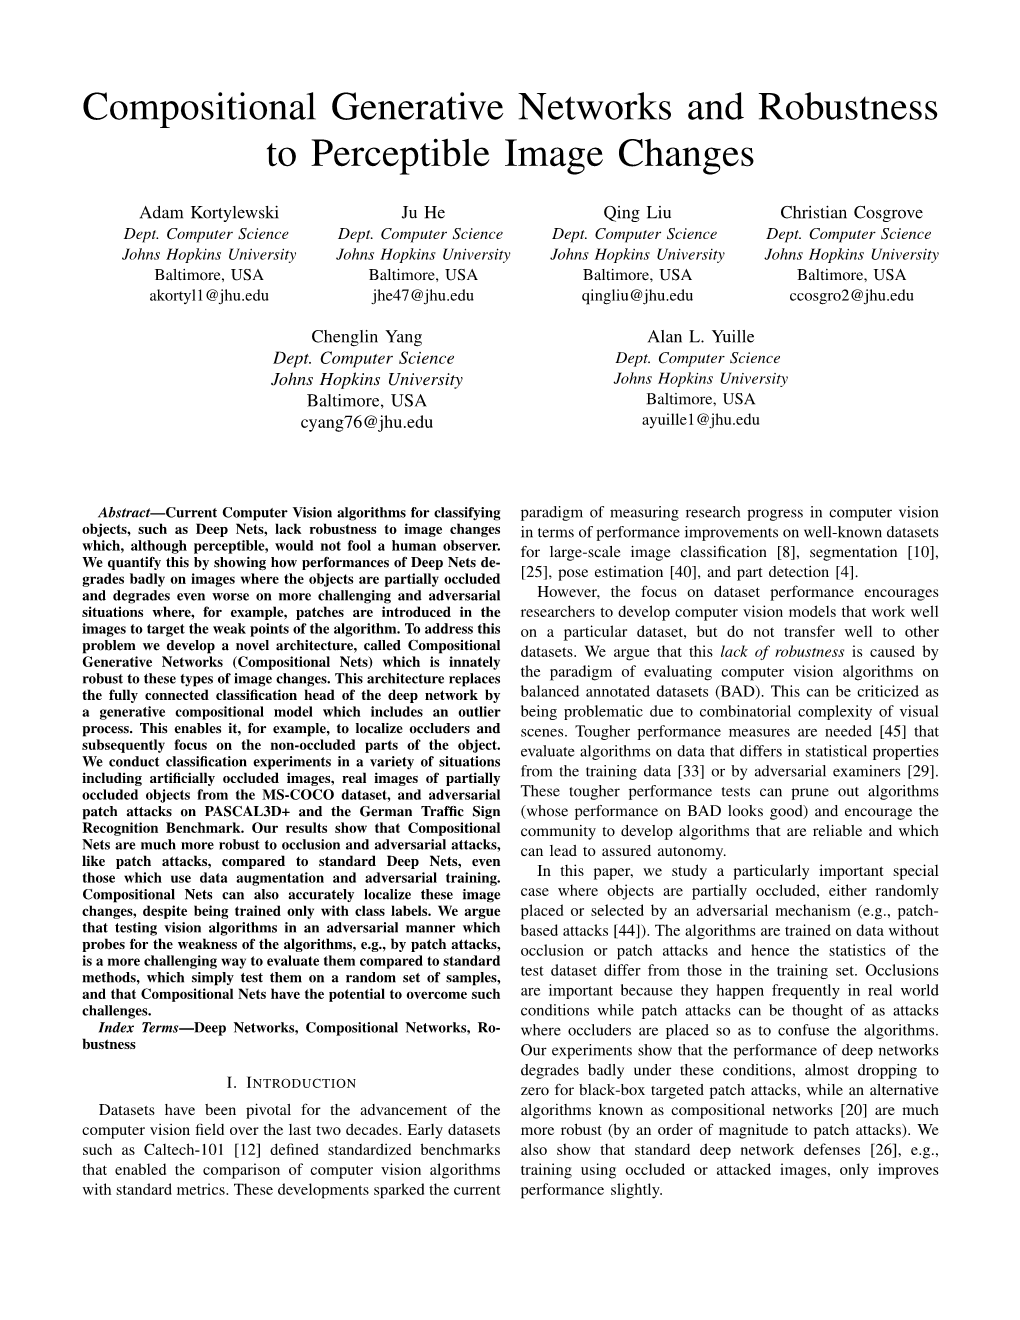 Compositional Generative Networks and Robustness to Perceptible Image Changes